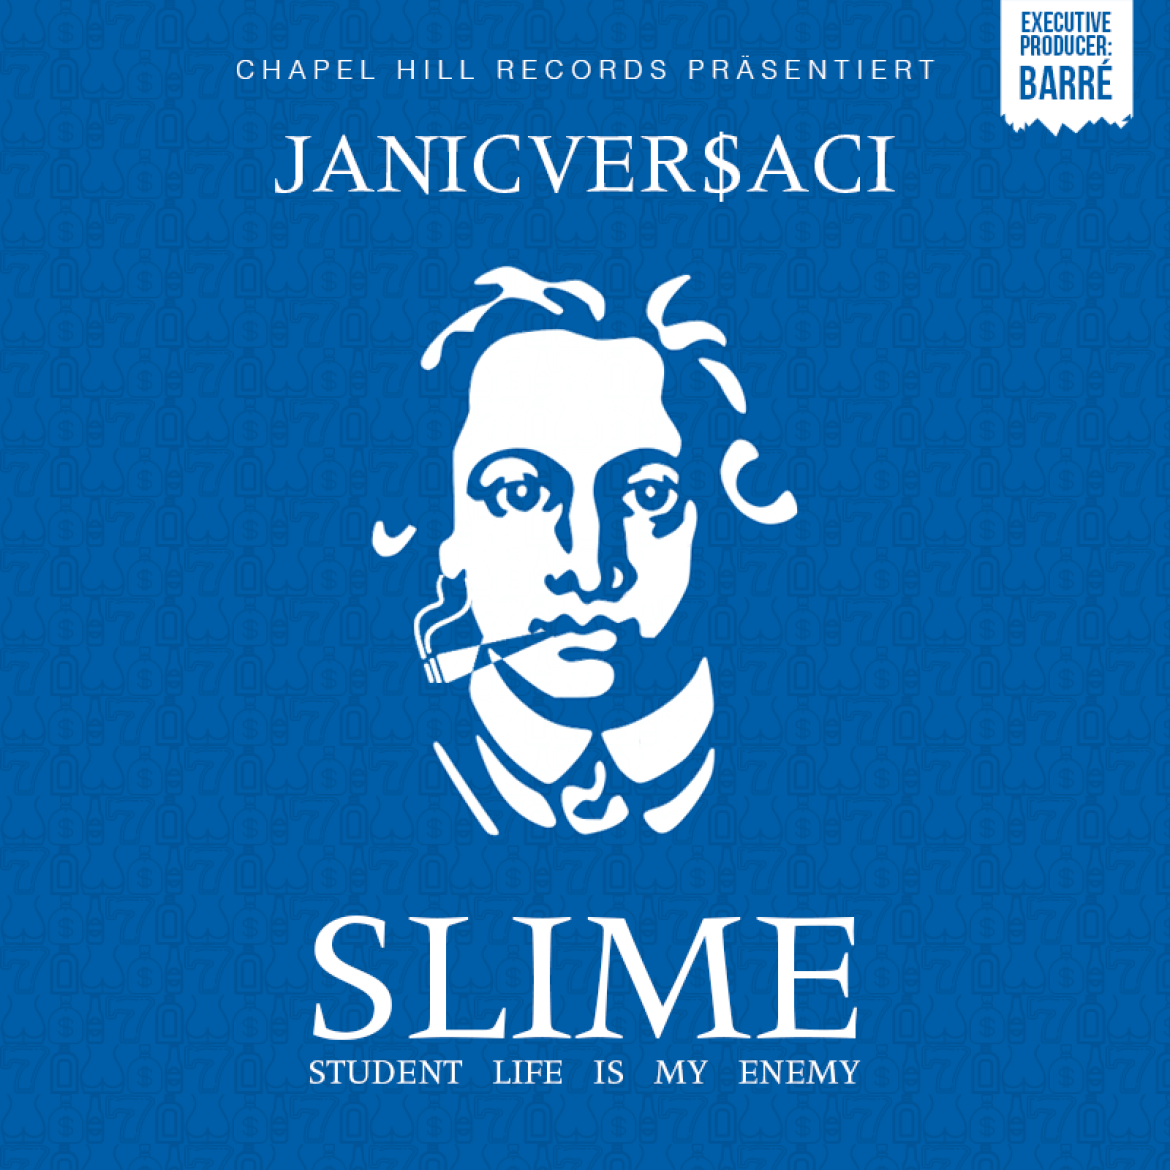 JanicVer$aci - Student Life Is My Enemy (S.L.I.M.E.)